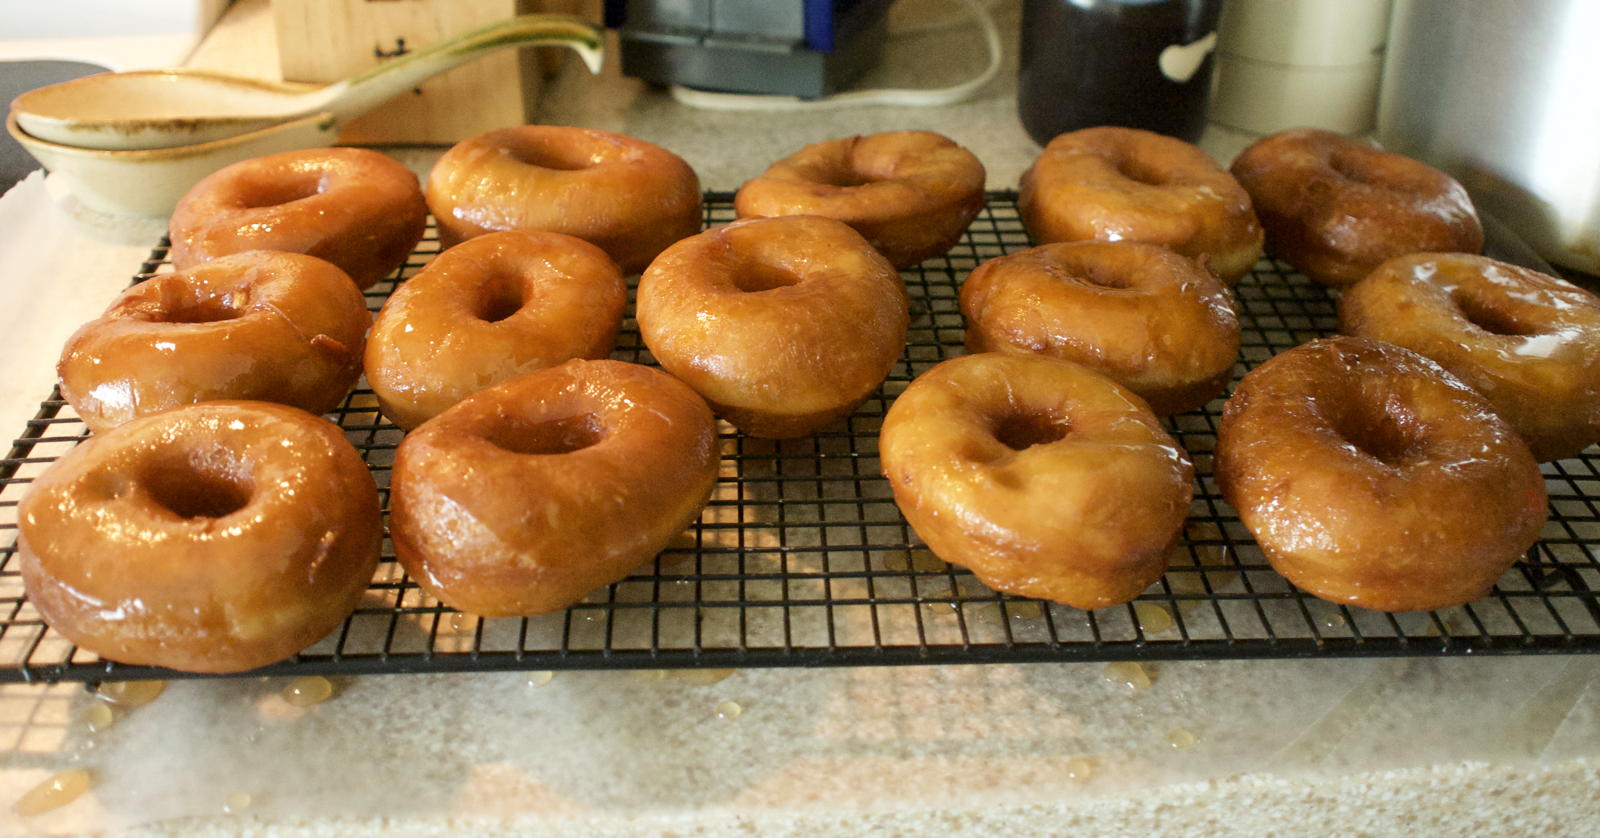 Glazed donuts: Glazed donuts from the Southern Living Holiday Cookbook.; donuts; Southern Living